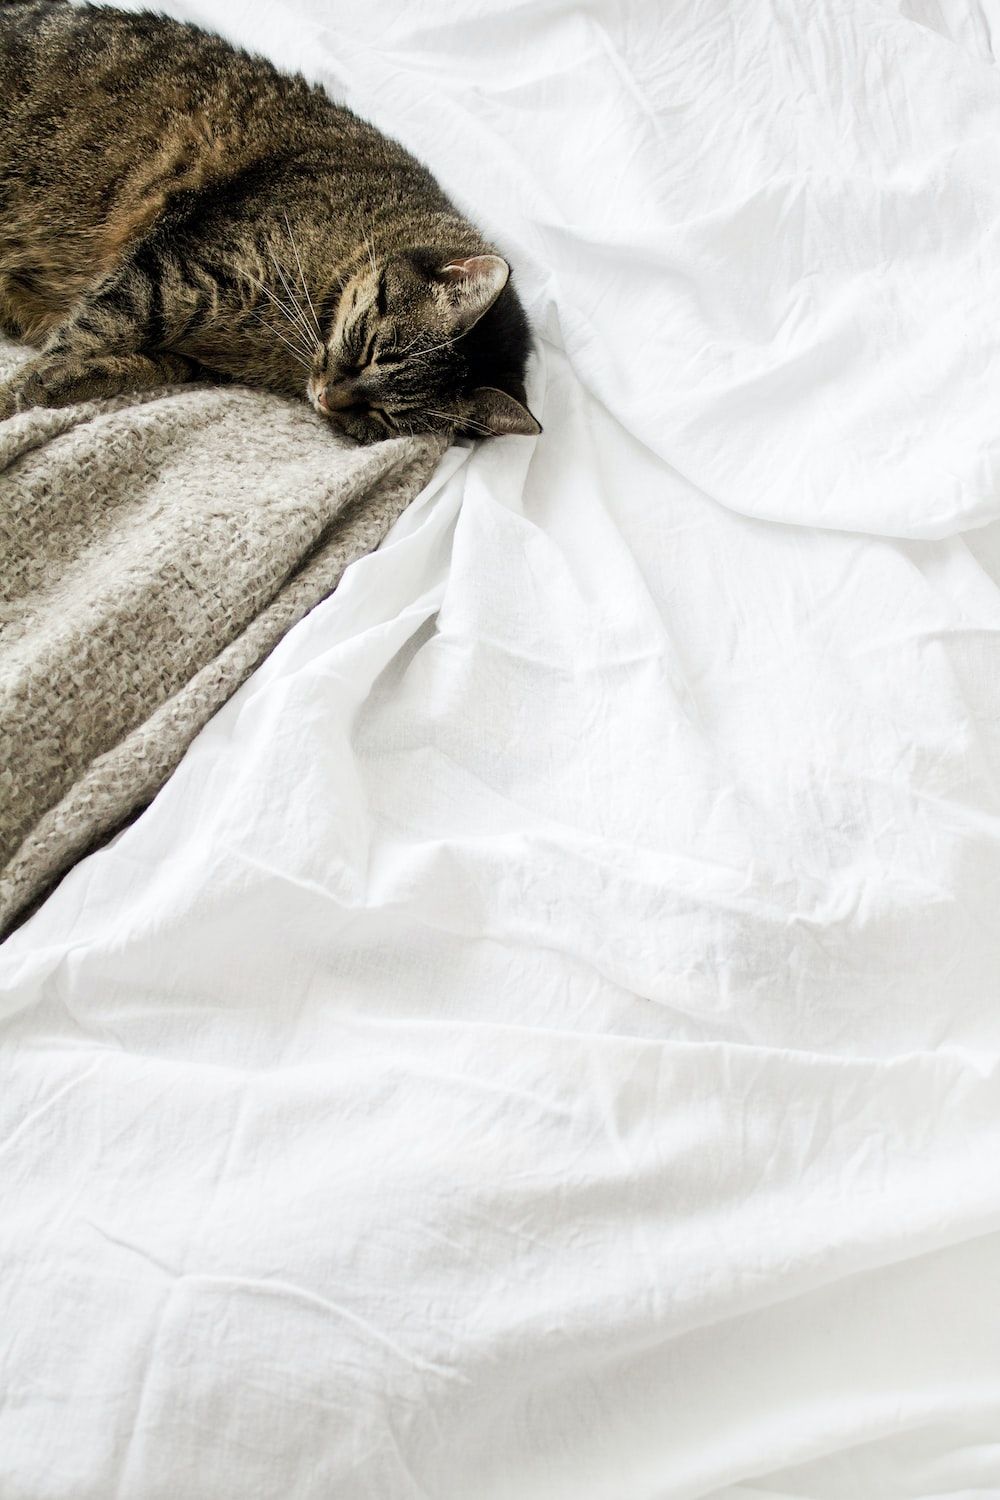 A cat sleeping on a bed with white sheets - Cat